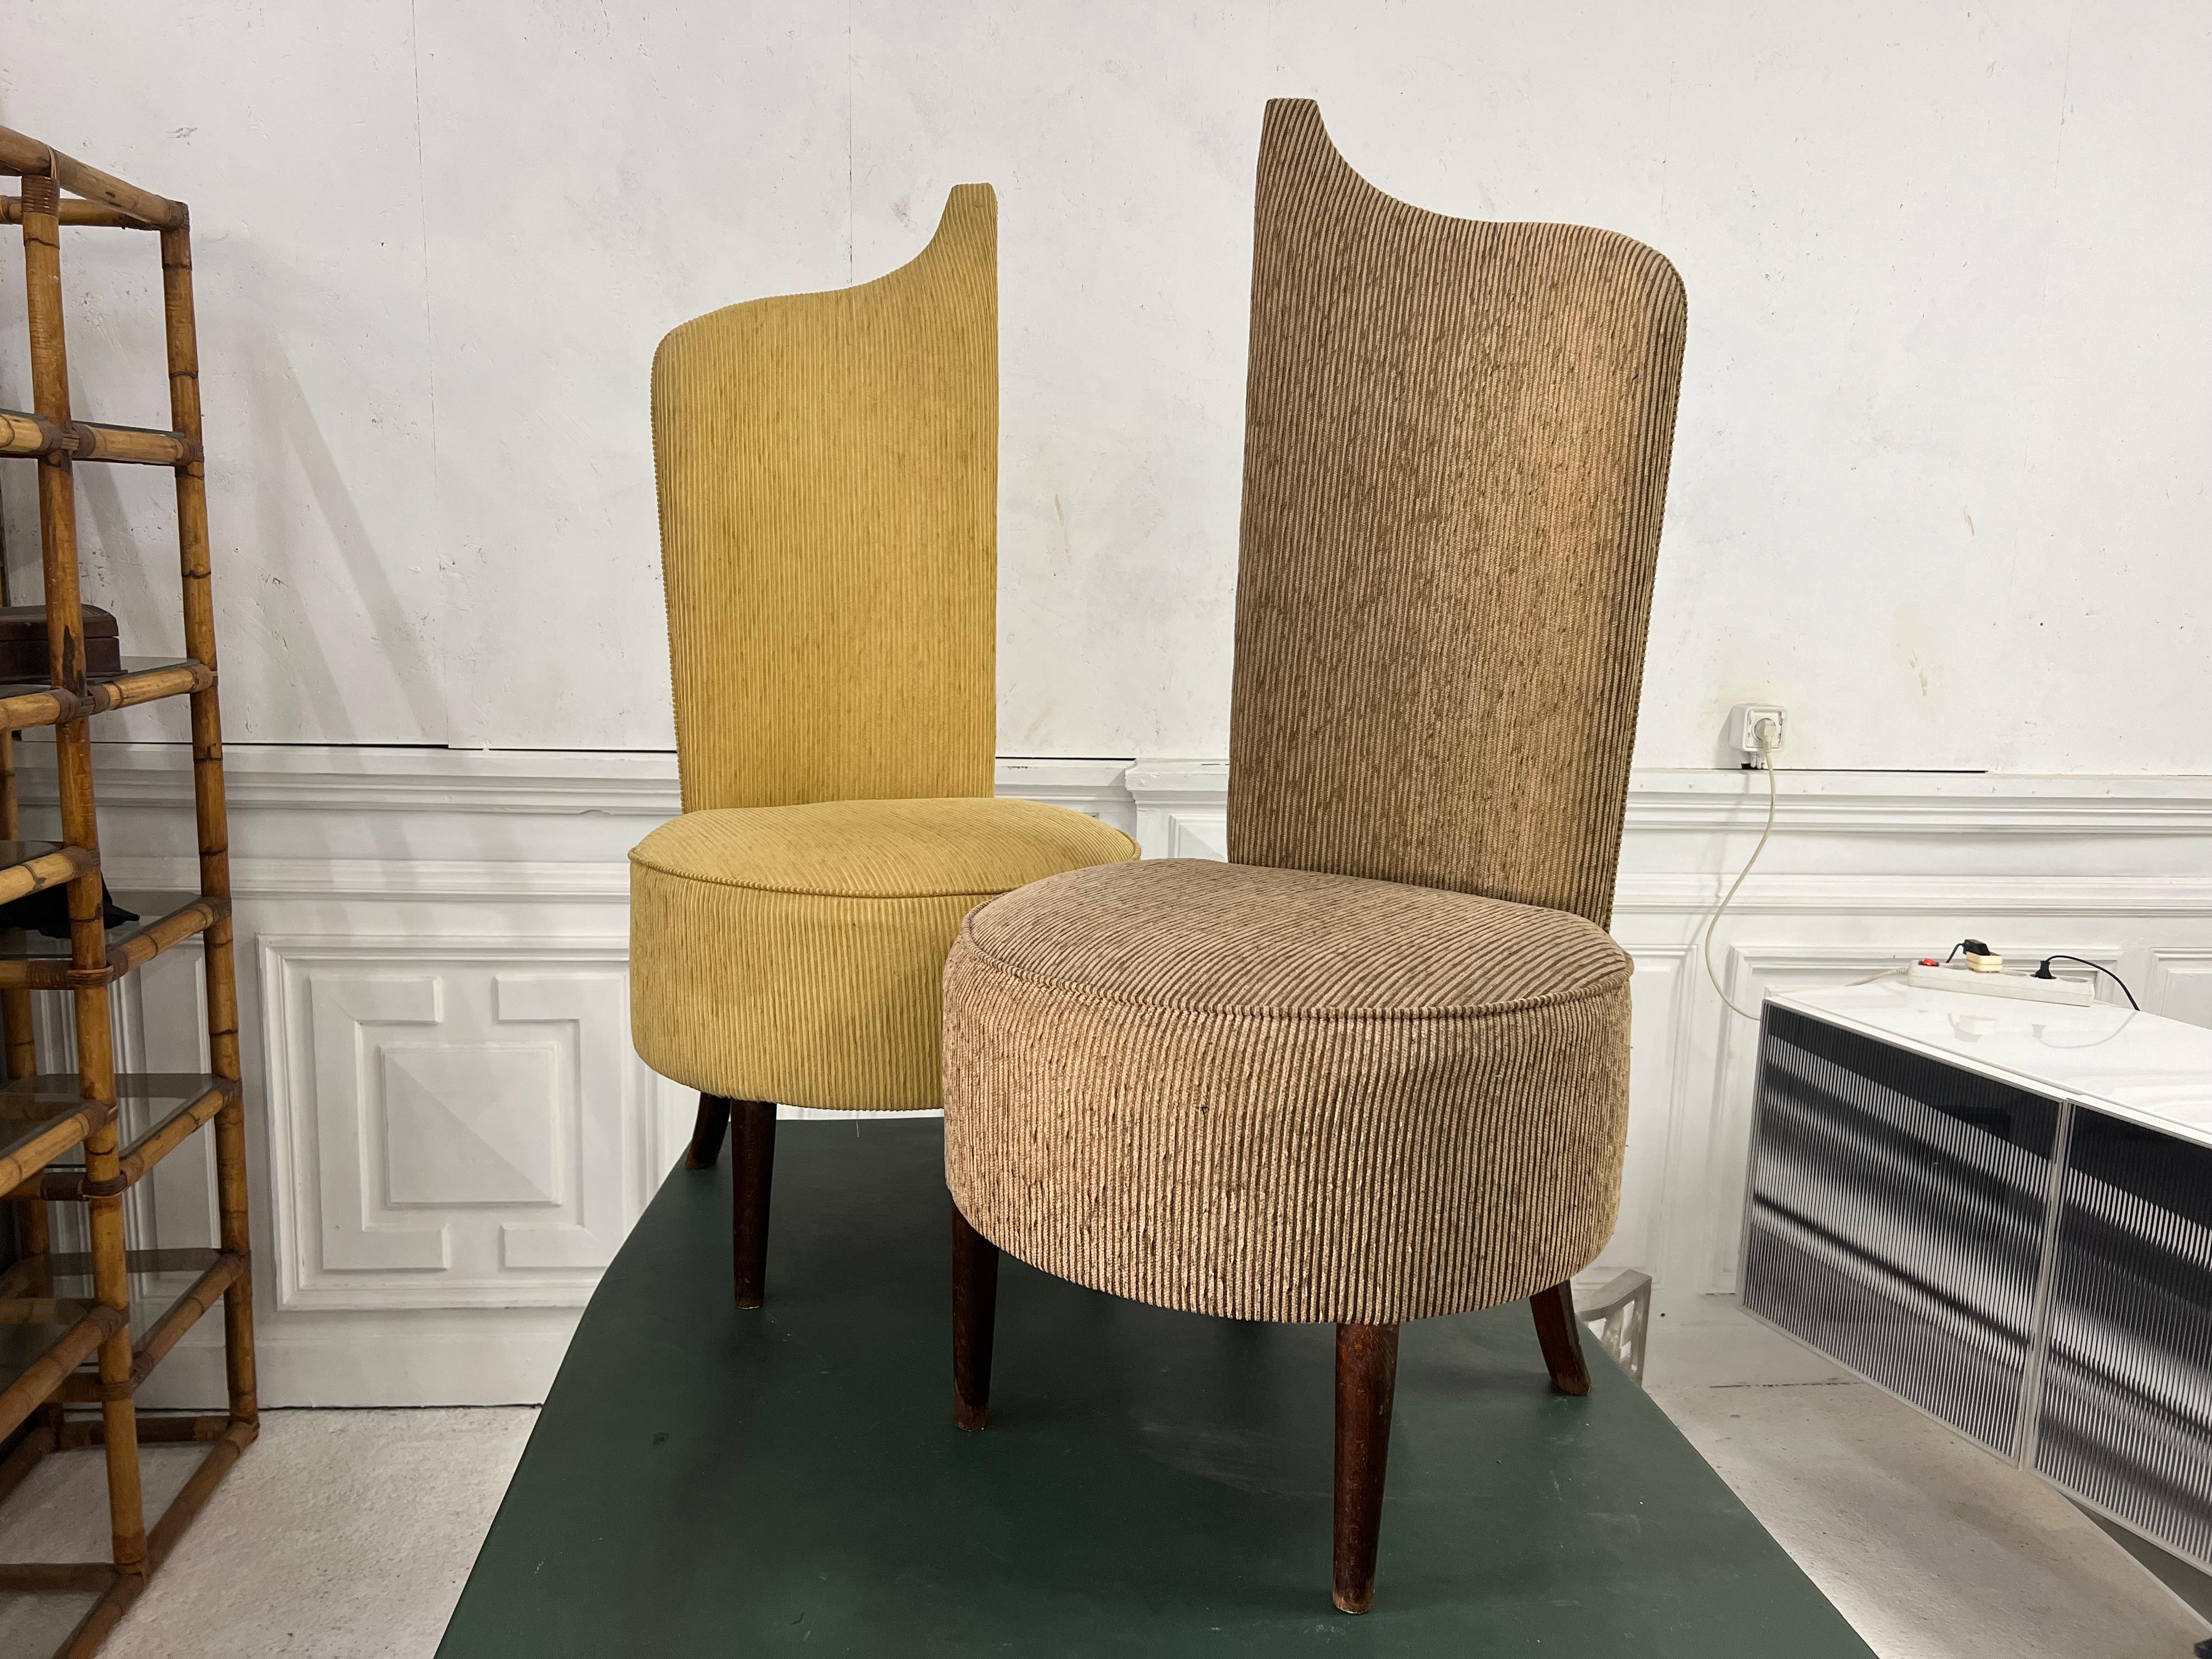 Pair of art deco chairs in two colors of velvet
Back seem to be a wing so « burlesque » 
Structure is in beech, typicaly original of 1930/1940 period
Chairs are very confortable and sculptural
